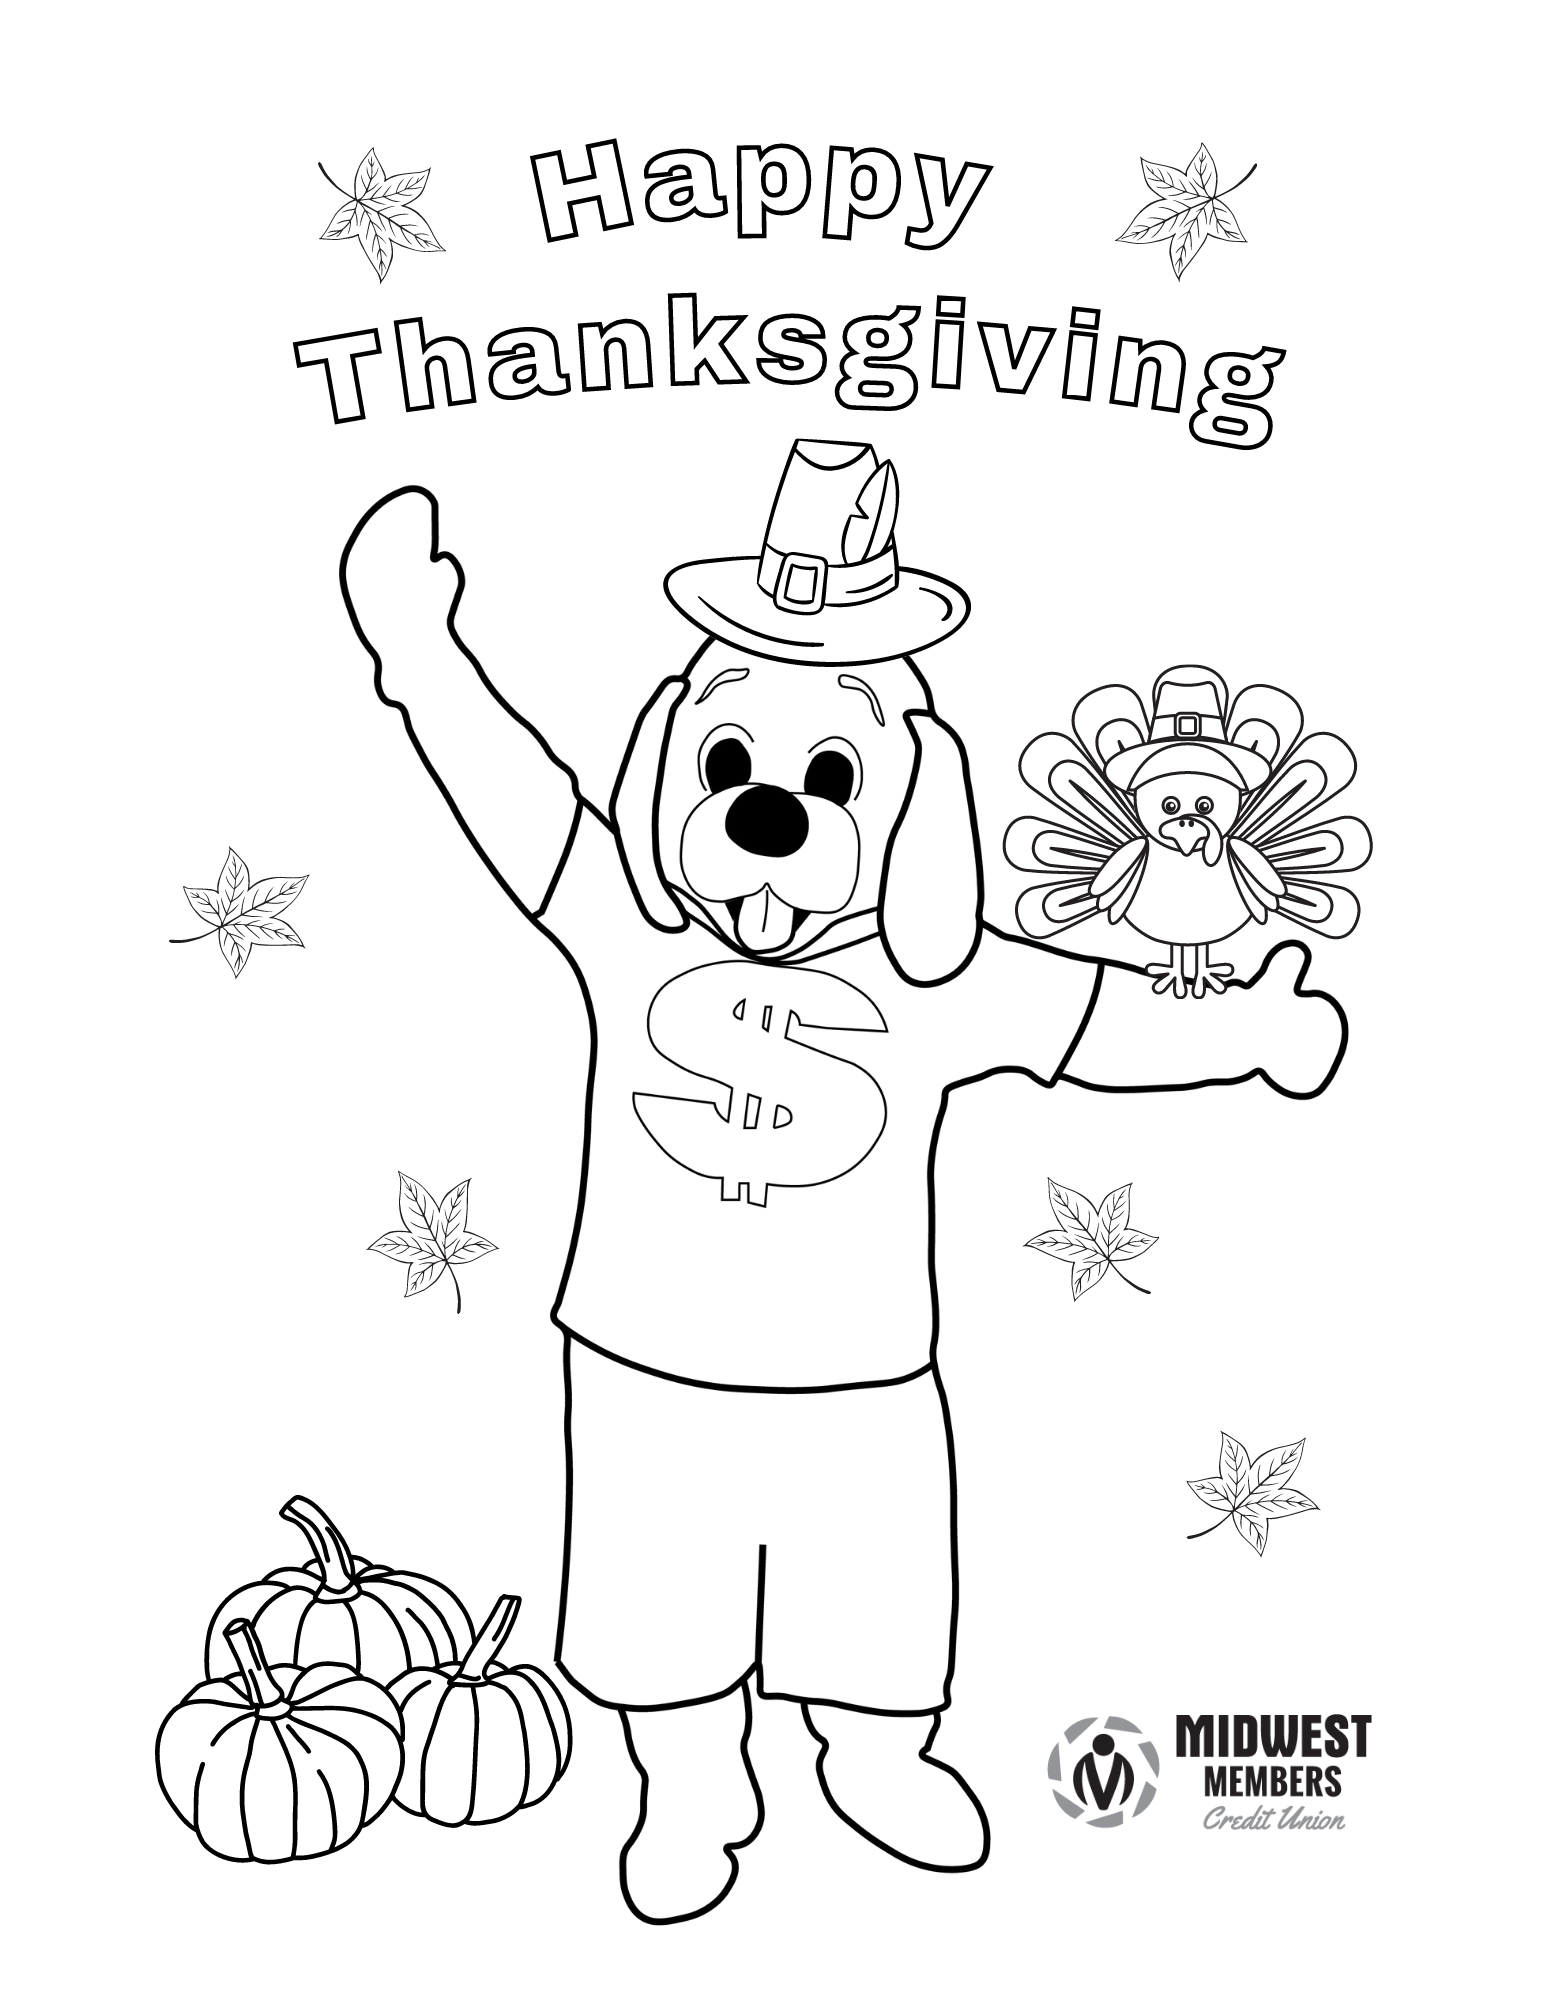 MD Thanksgiving Coloring Page